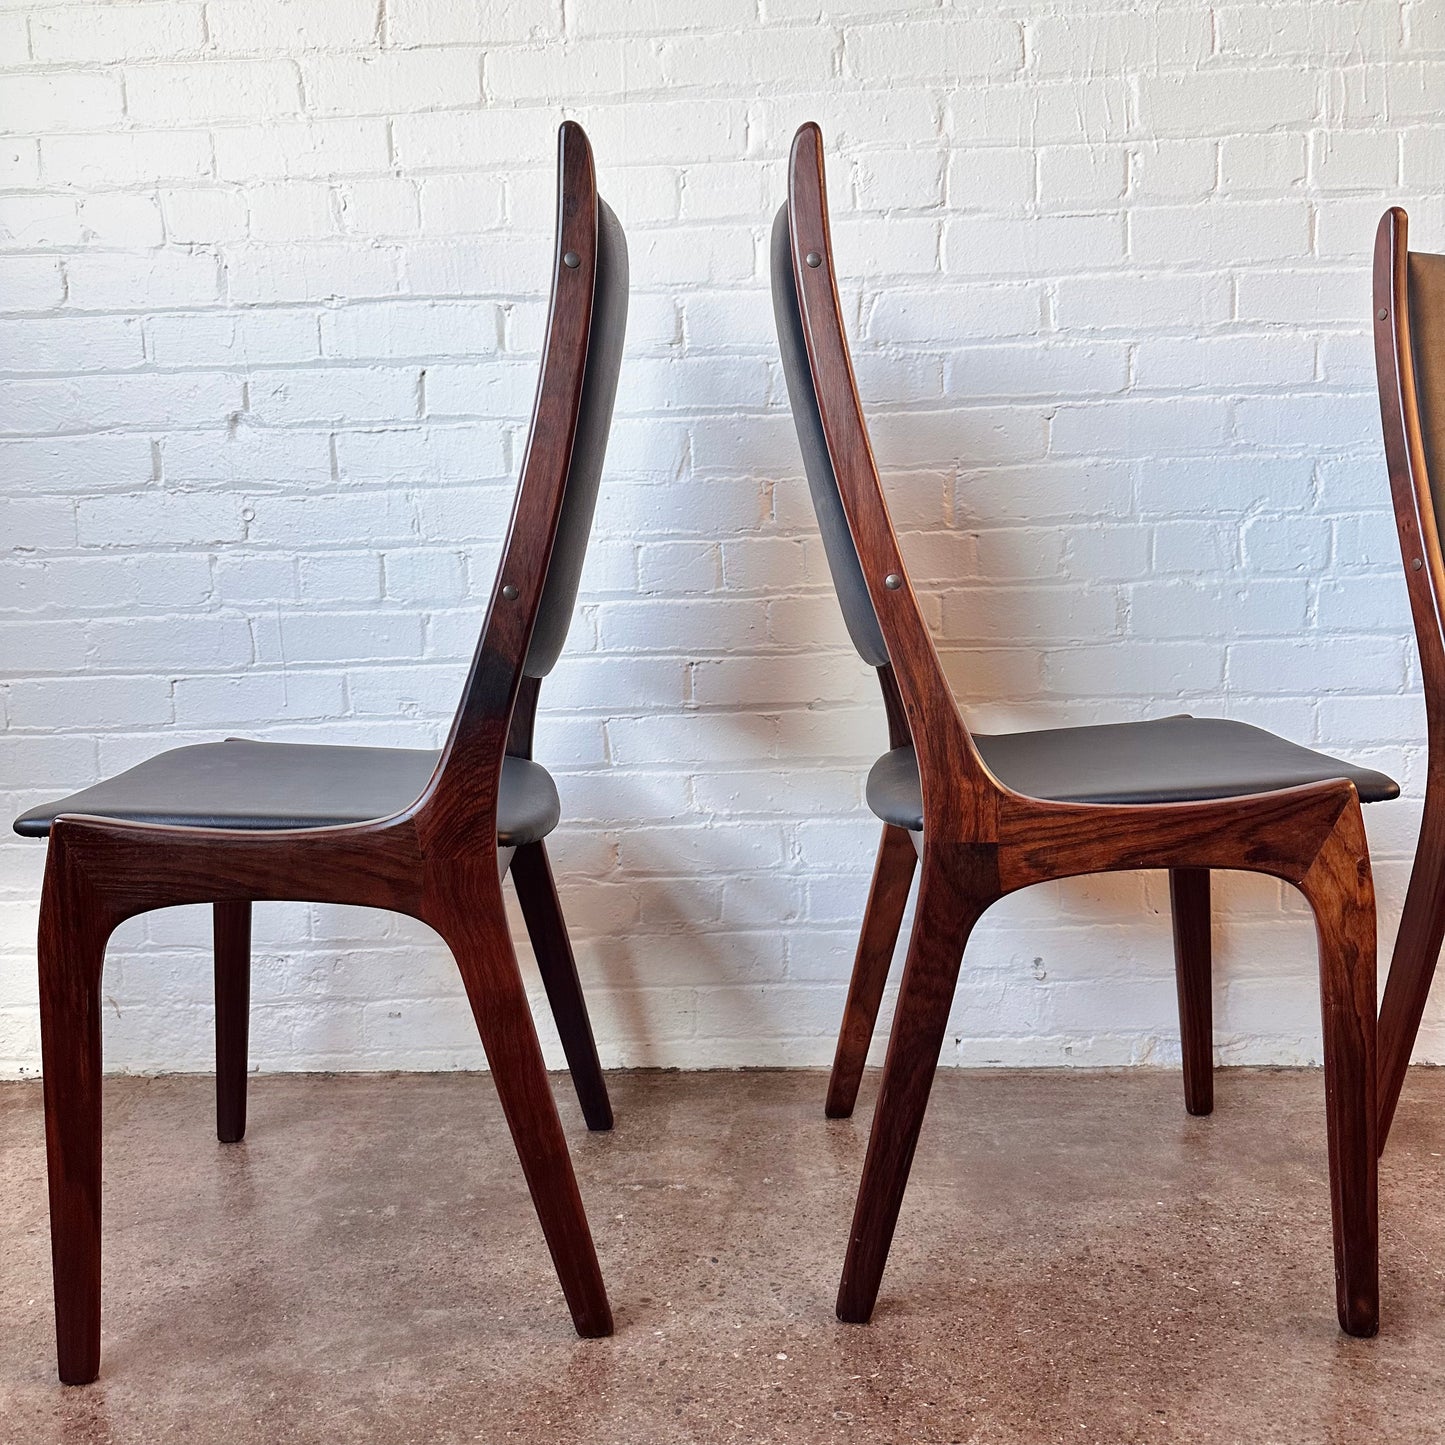 SET OF 6 KAI KRISTENSEN FOR K.S. MOBLER ROSEWOOD DINING CHAIRS